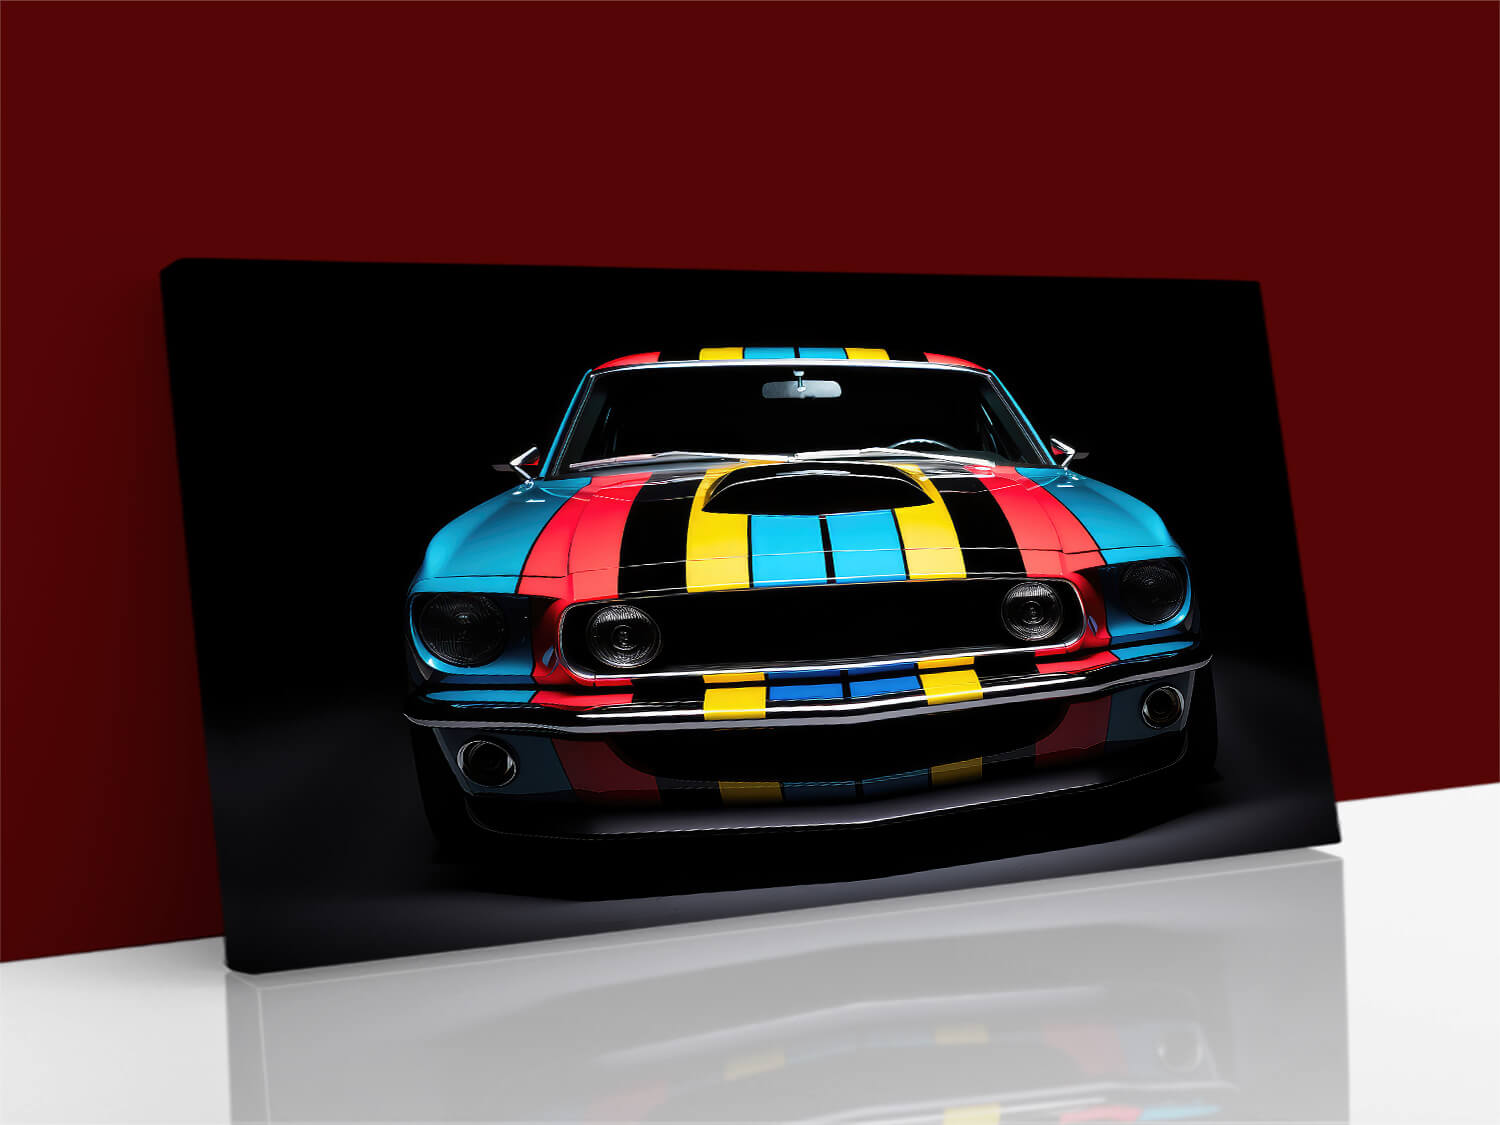 N1_56211088_Racing Stripes car Revival Realistic On Black Background AOA10899